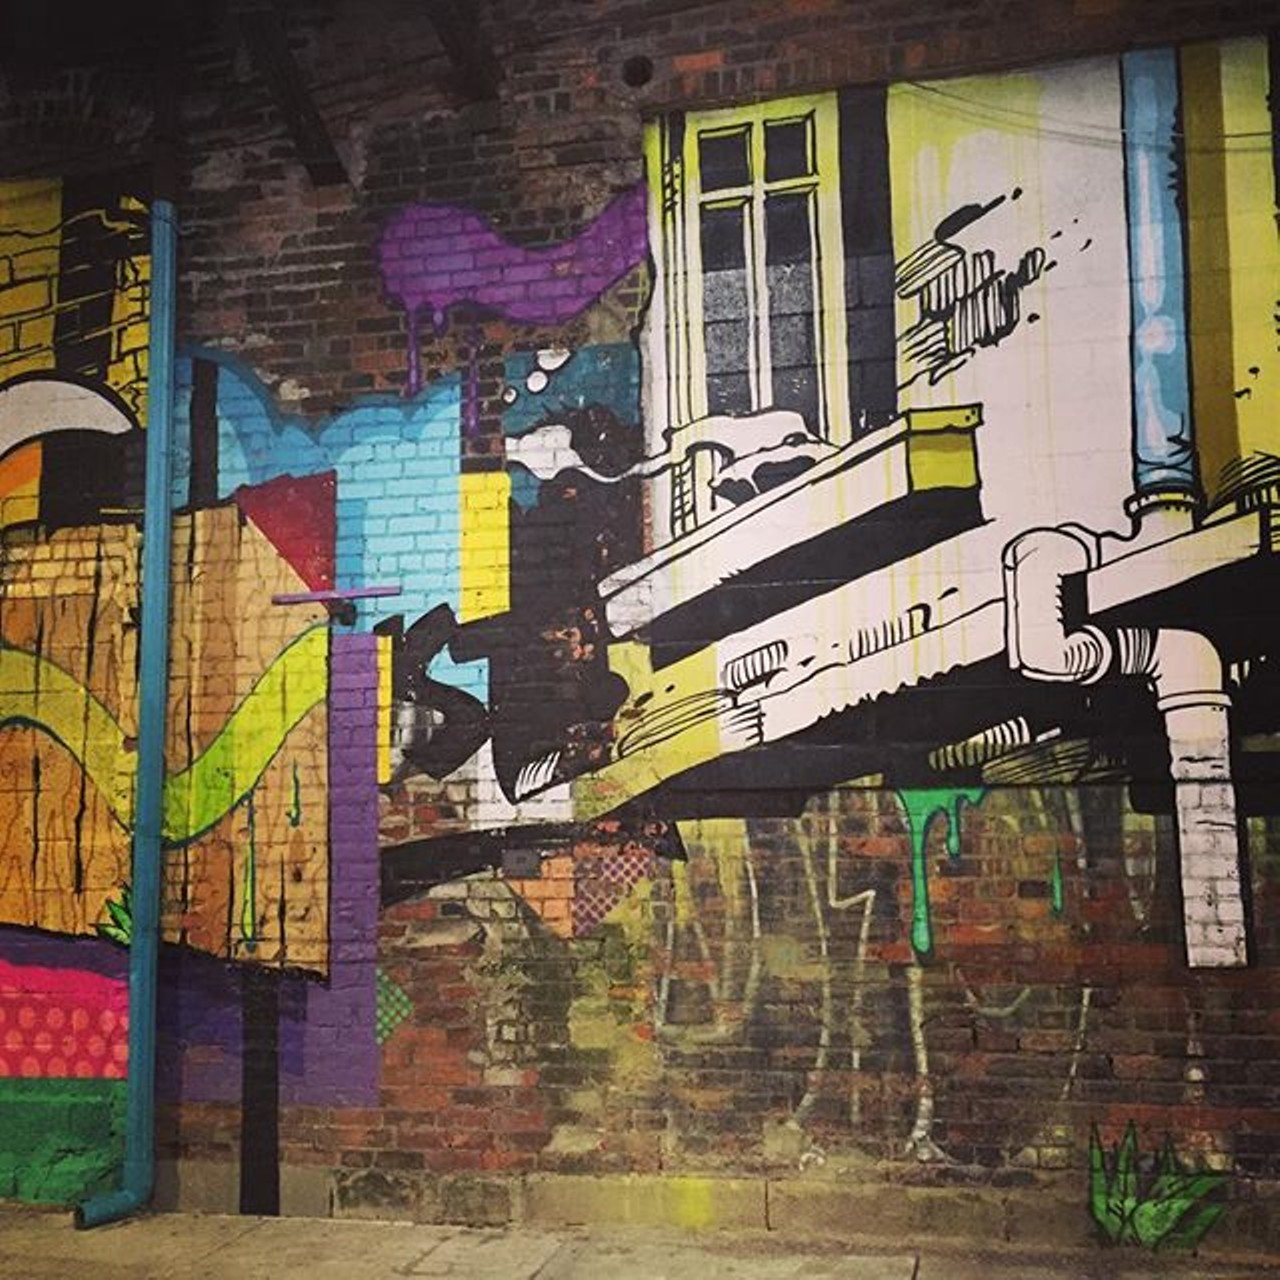 In front of graffiti
Art takes on a variety of forms. Whether it&#146;s actually on a canvas or on a wall, art is art. Some graffiti can be crude, but there are some decent murals occupying various buildings throughout the city that can help set the make out mood. (Photo courtesy of instagram user tlisaacs)